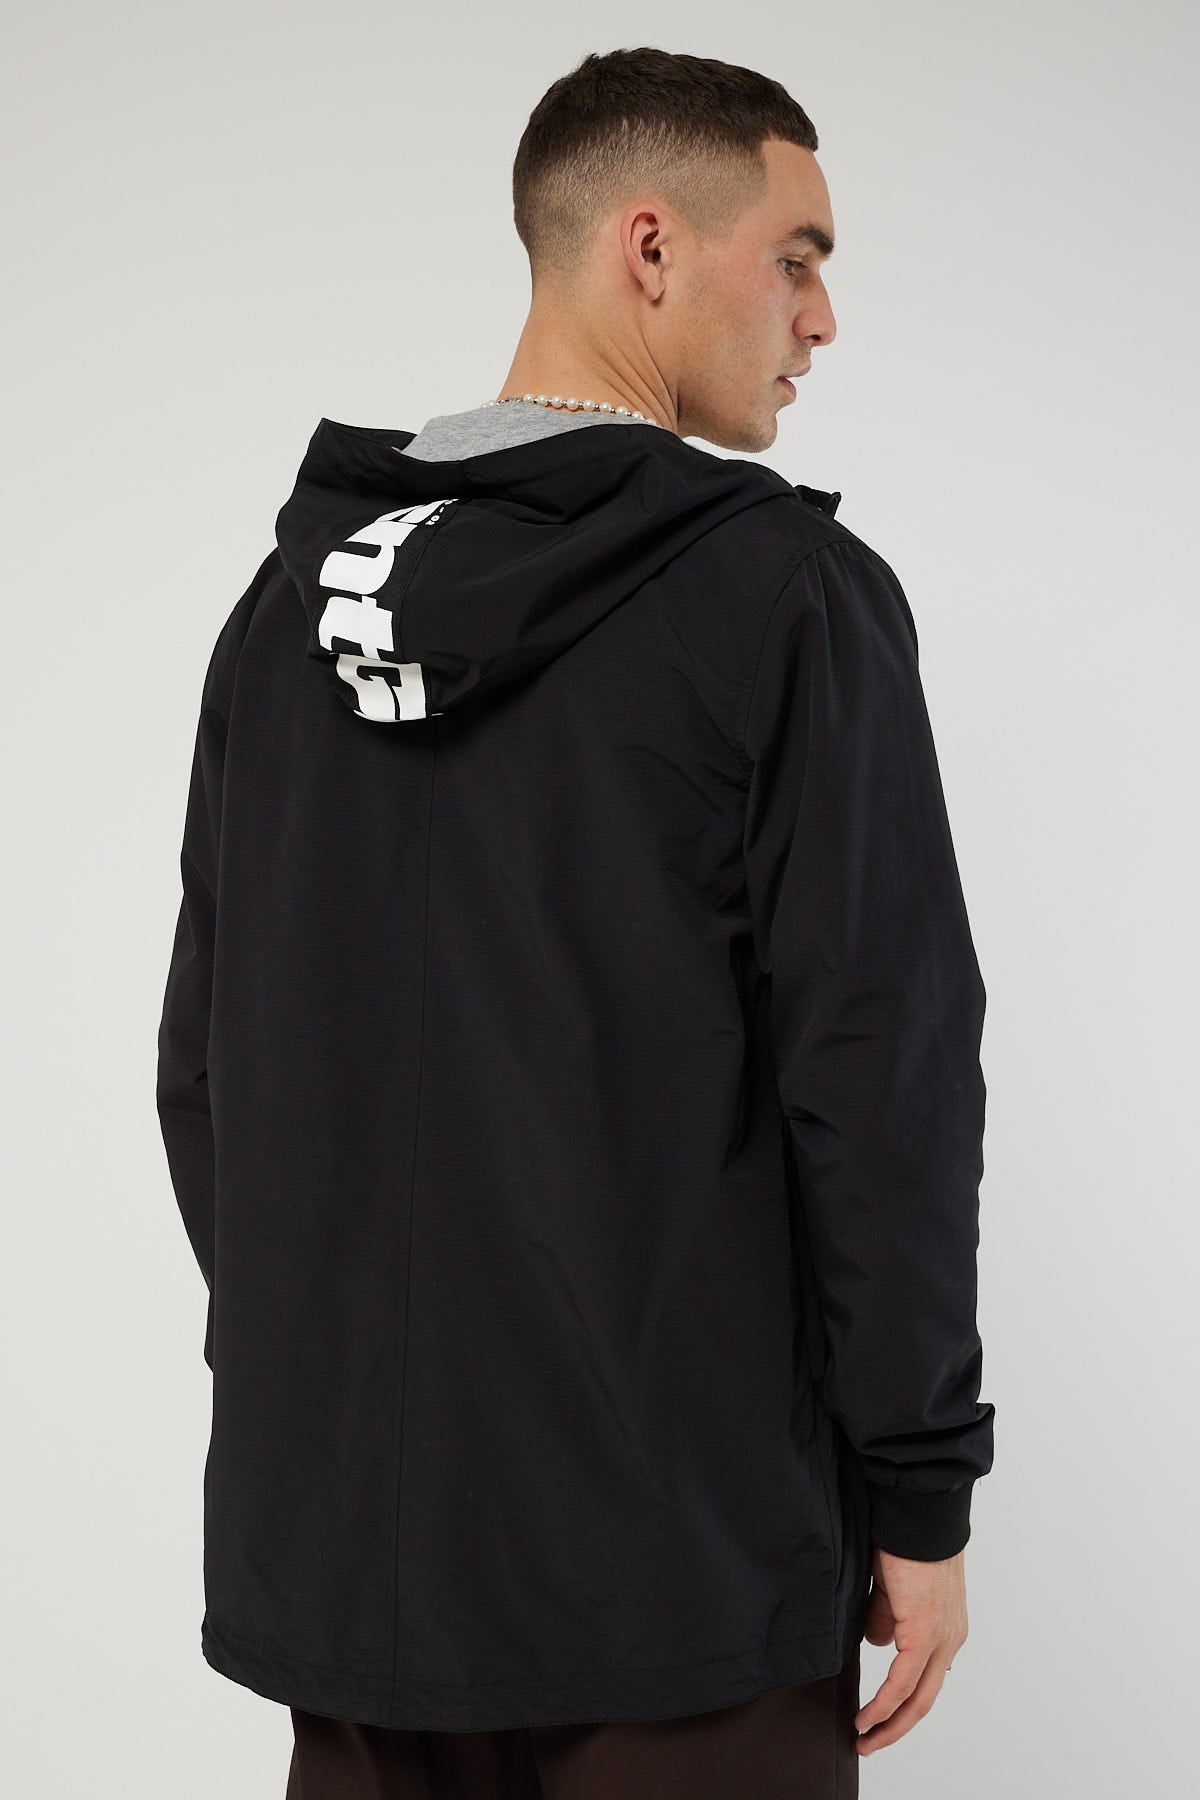 St Goliath Covered Ripstop Jersey Lined Jacket Black